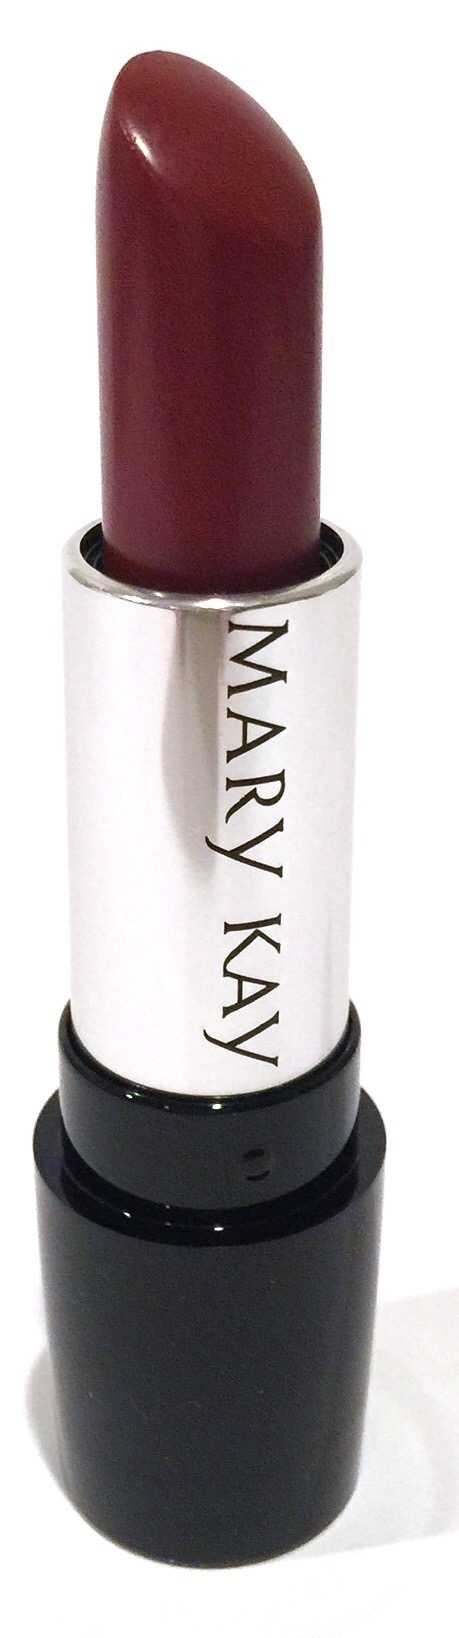 Mary Kay Lips :: Midnight Red~Gel Semi-Matte Lipstick - Discount Mary